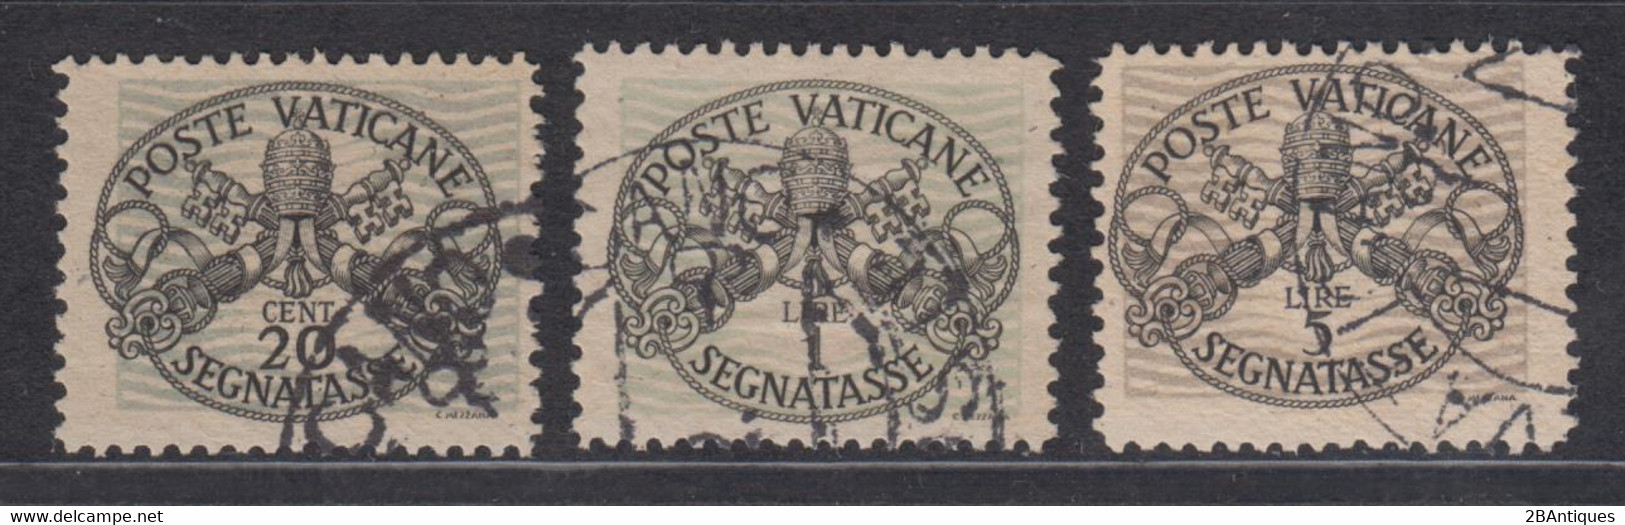 VATICANE 1931 - Postage Due Type II Thick Lines, Grey Paper RARE! - Taxes